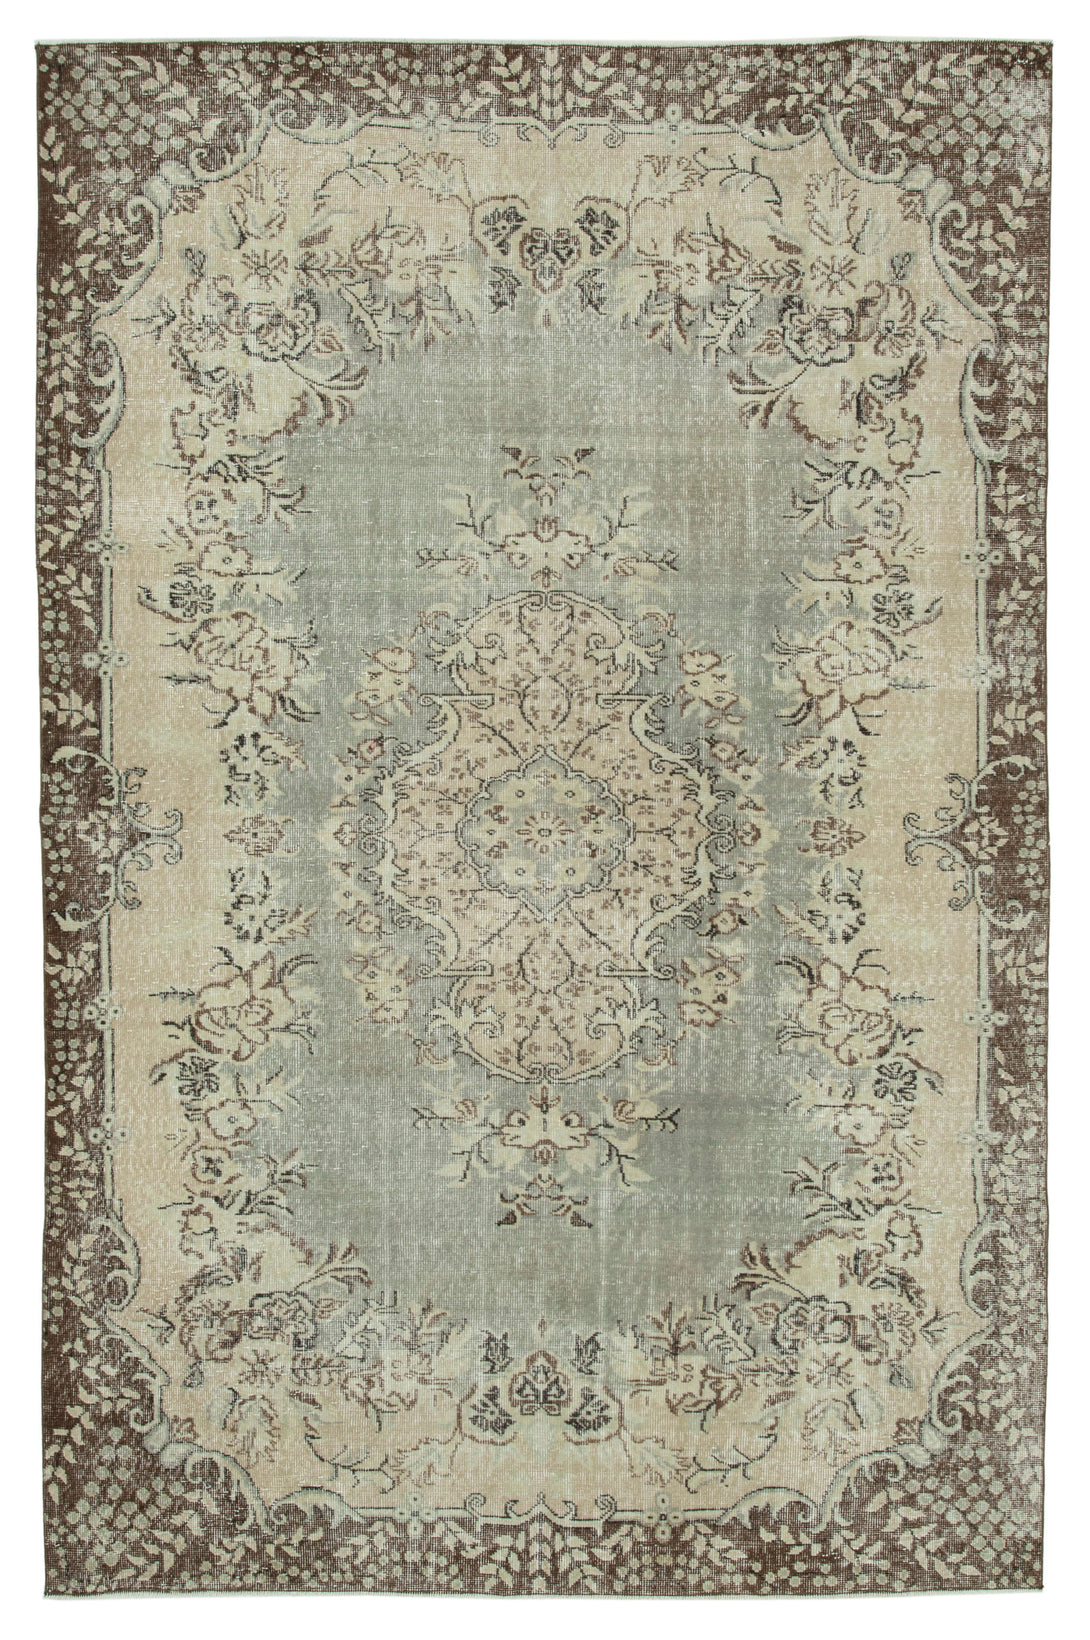 Handmade White Wash Area Rug > Design# OL-AC-34014 > Size: 6'-10" x 10'-4", Carpet Culture Rugs, Handmade Rugs, NYC Rugs, New Rugs, Shop Rugs, Rug Store, Outlet Rugs, SoHo Rugs, Rugs in USA